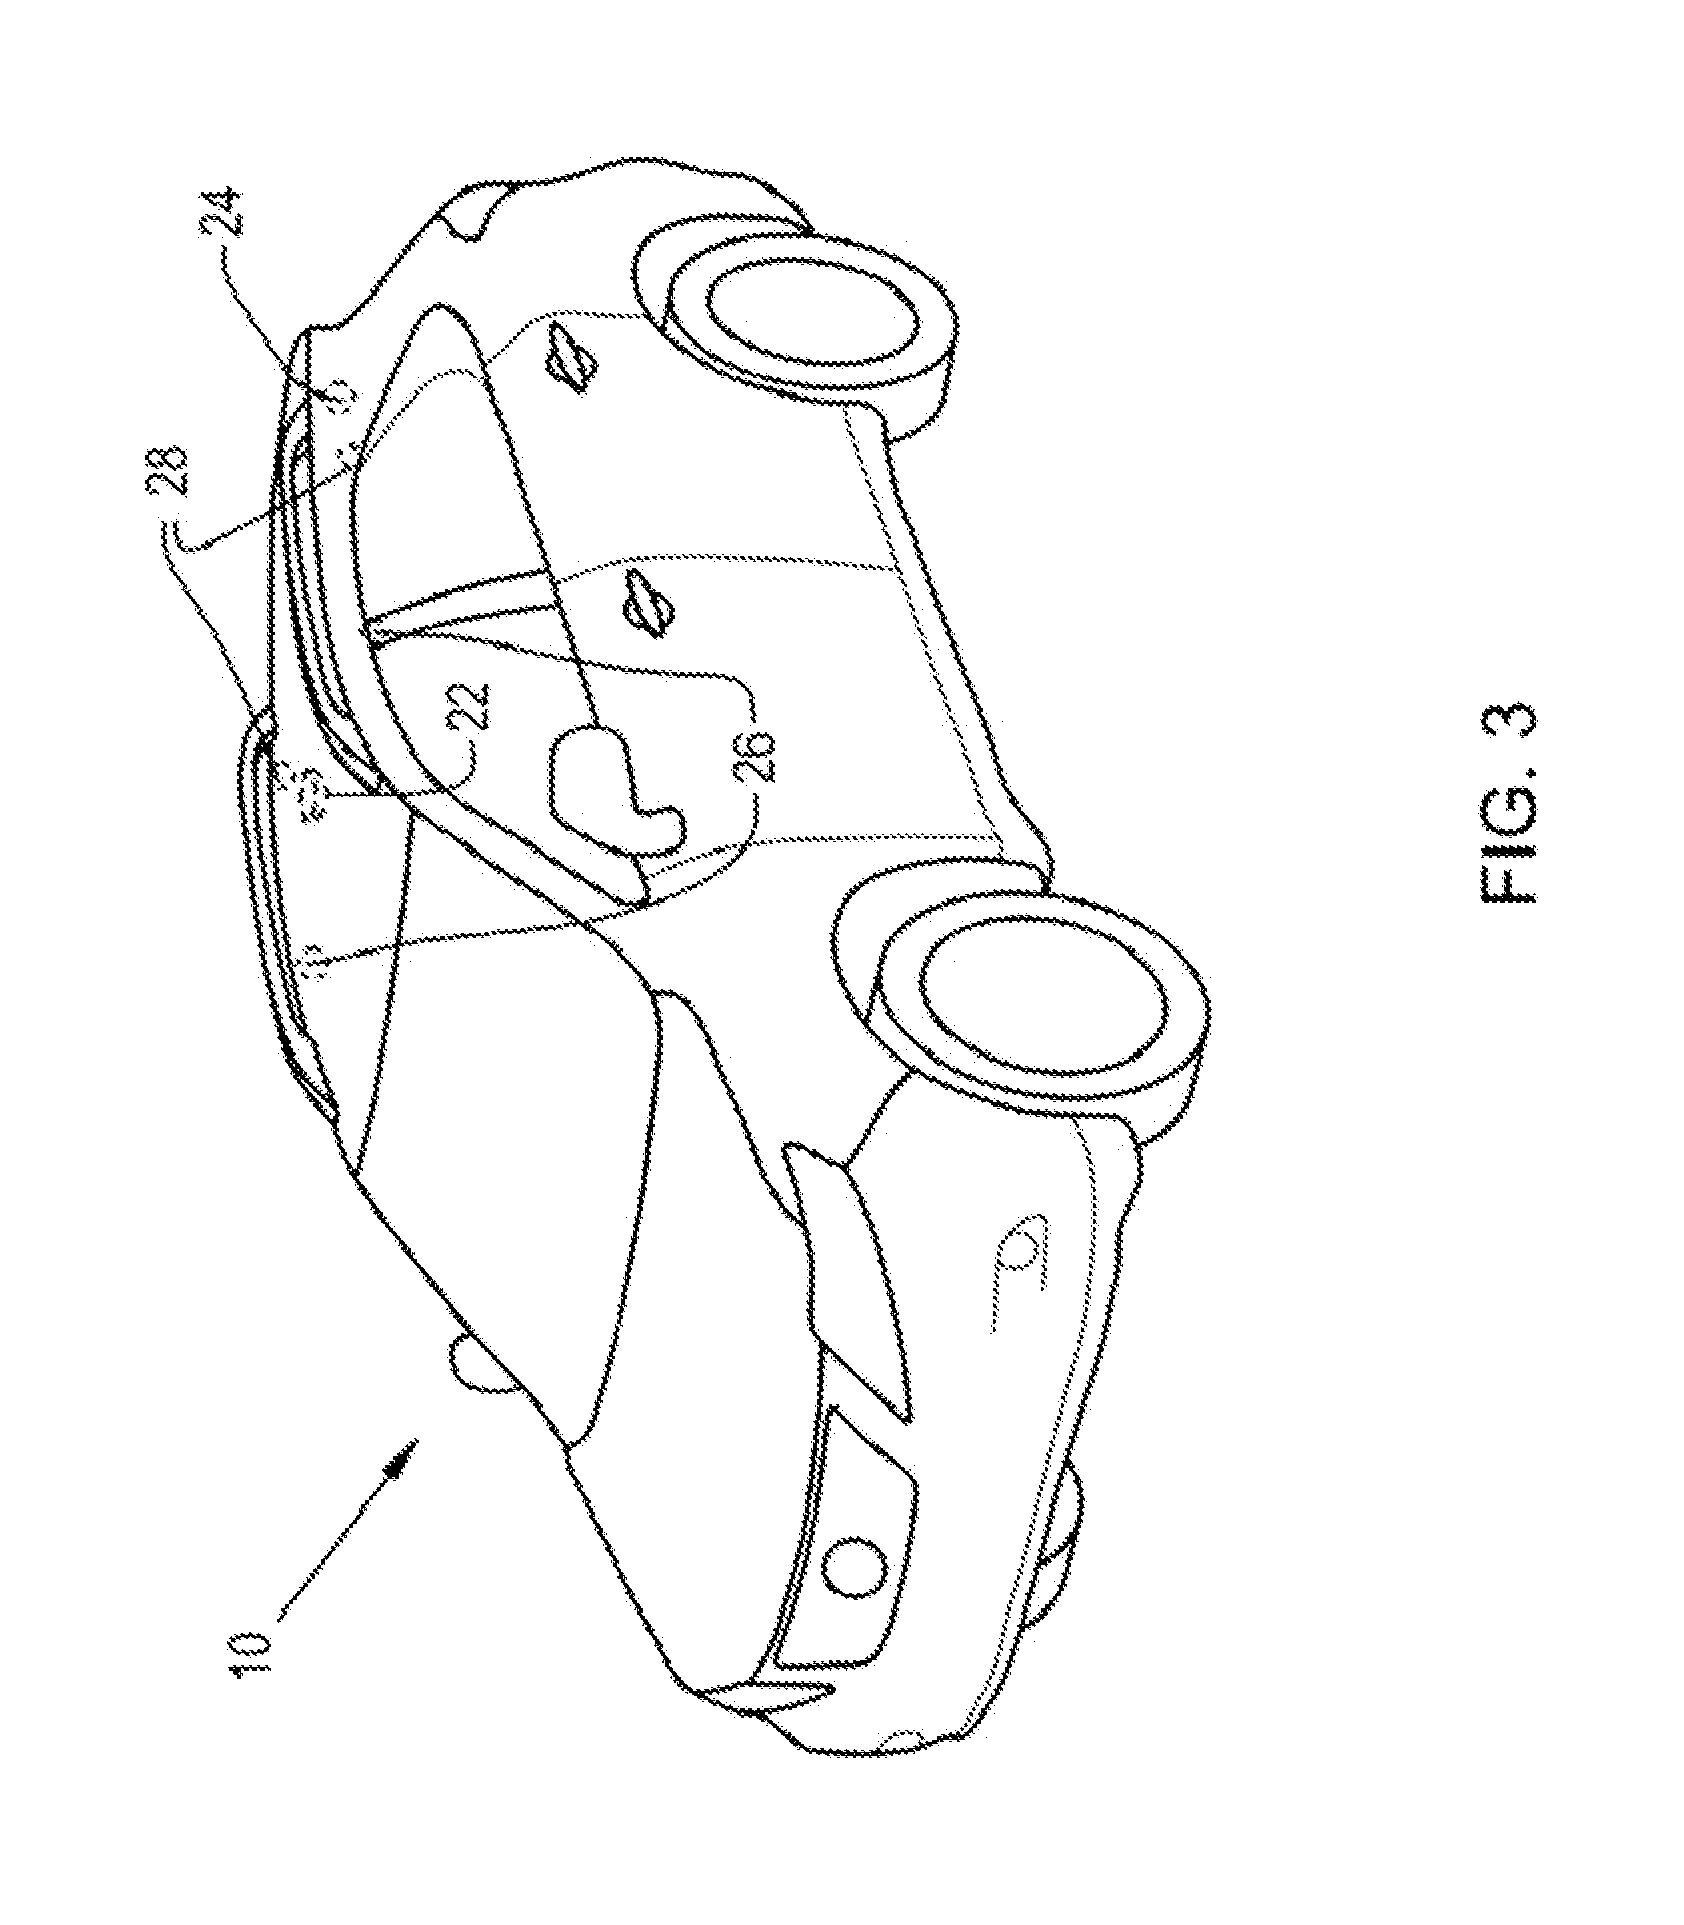 Driving assistance systems and methods